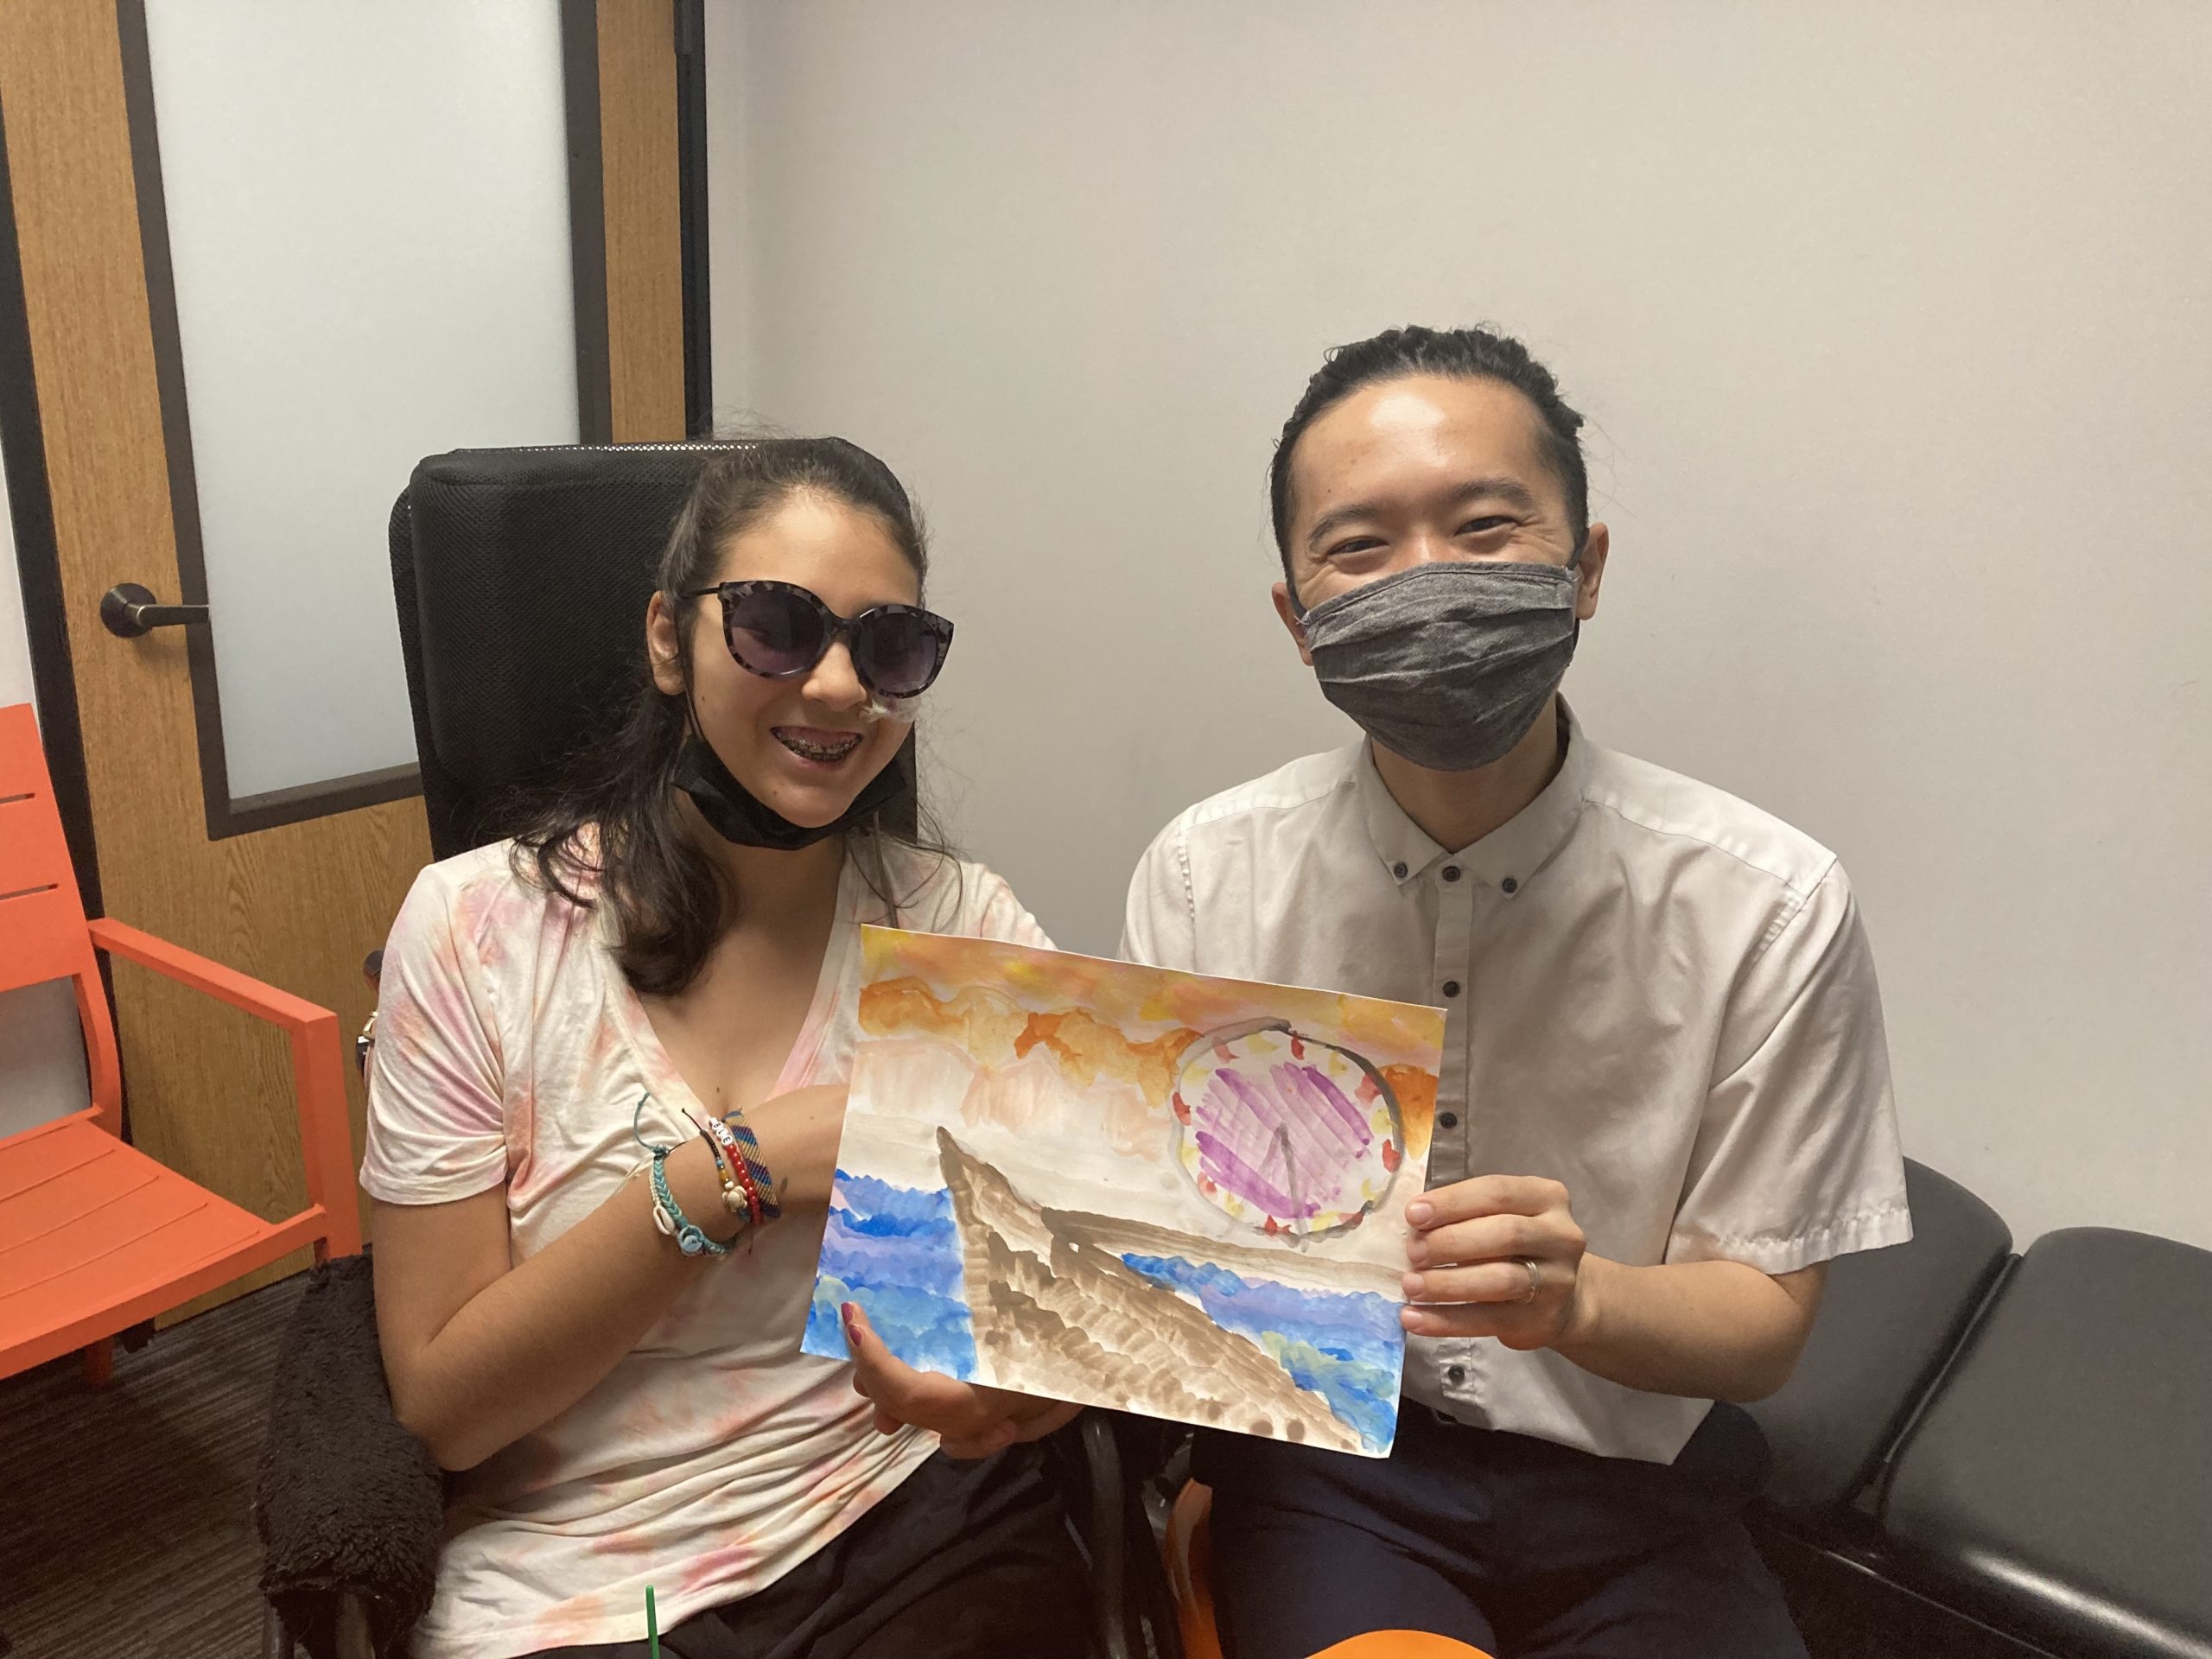 Bella Adlah and Dr. Naoya Ogura with her painting of the Santa Monica Pier at Re+active Physical Therapy in California.